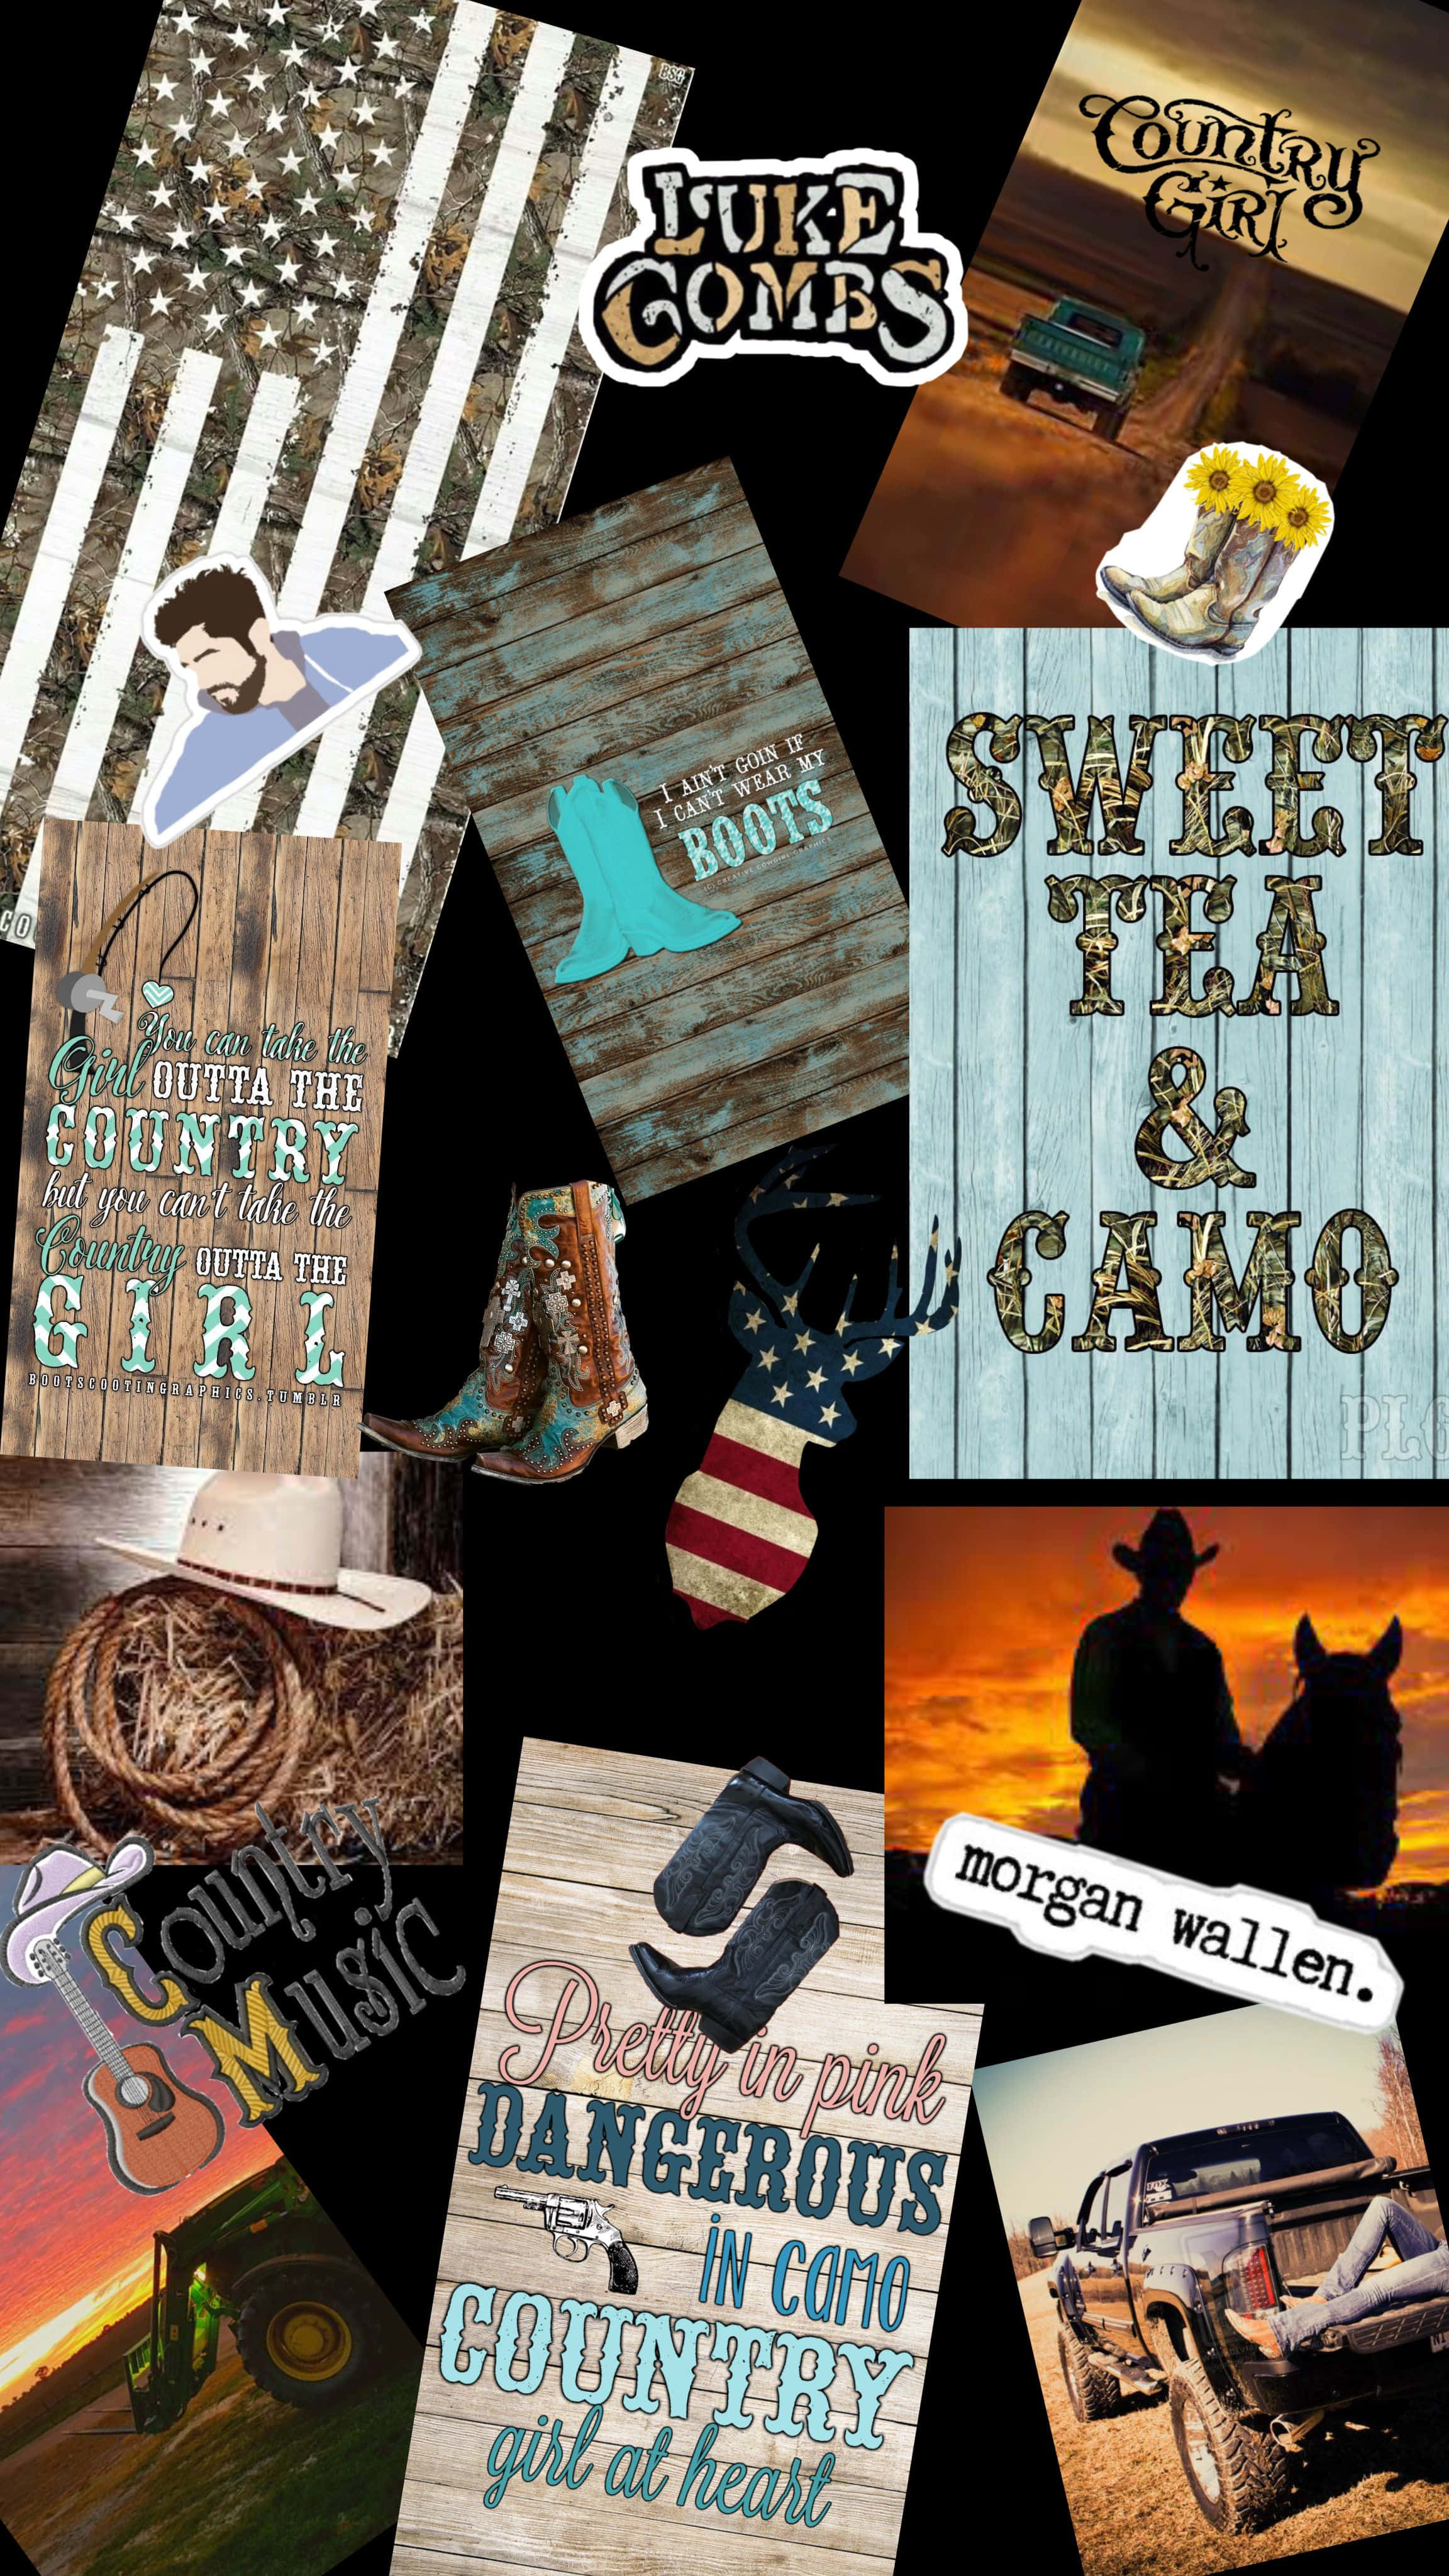 Download Cute Country Images And Musician Collage Wallpaper ...